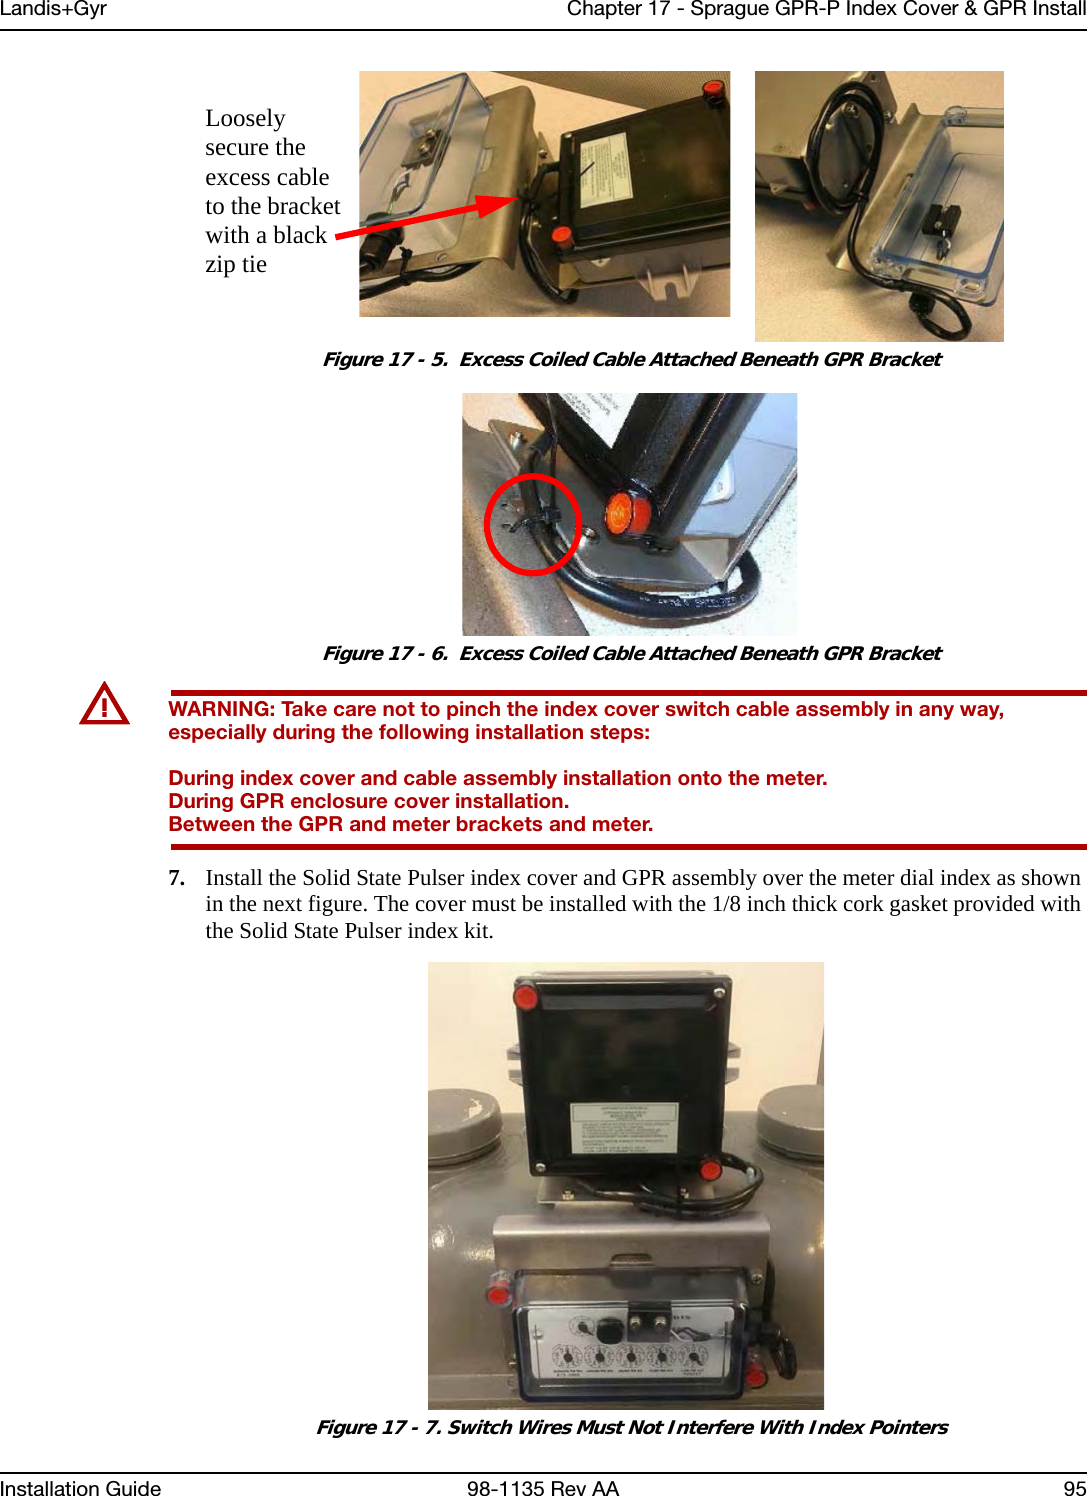 Landis+Gyr Chapter 17 - Sprague GPR-P Index Cover &amp; GPR InstallInstallation Guide 98-1135 Rev AA 95 Figure 17 - 5.  Excess Coiled Cable Attached Beneath GPR Bracket Figure 17 - 6.  Excess Coiled Cable Attached Beneath GPR BracketUWARNING: Take care not to pinch the index cover switch cable assembly in any way, especially during the following installation steps:During index cover and cable assembly installation onto the meter.During GPR enclosure cover installation.Between the GPR and meter brackets and meter.7. Install the Solid State Pulser index cover and GPR assembly over the meter dial index as shown in the next figure. The cover must be installed with the 1/8 inch thick cork gasket provided with the Solid State Pulser index kit.  Figure 17 - 7. Switch Wires Must Not Interfere With Index PointersLoosely secure the excess cable to the bracket with a black zip tie